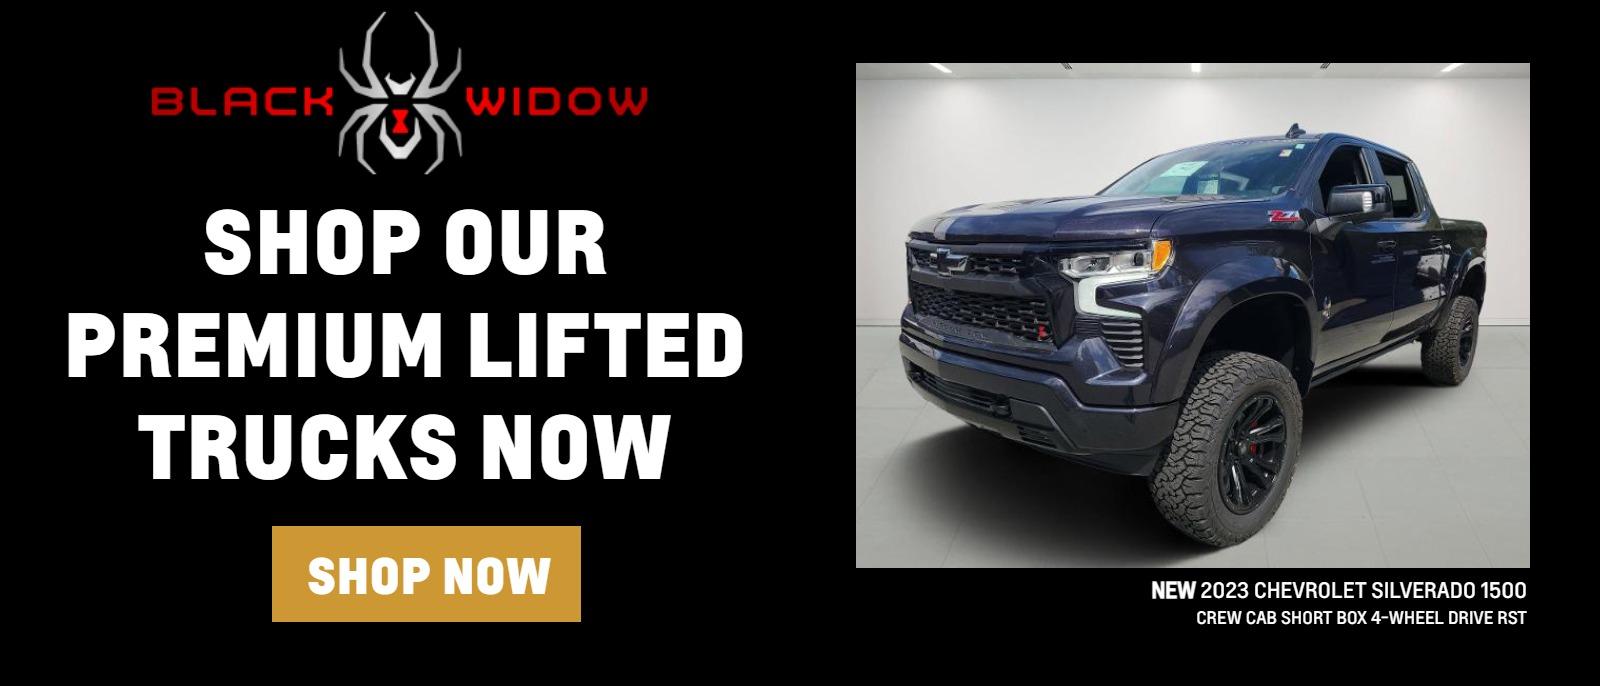 Shop Our Premium Lifted Trucks Now